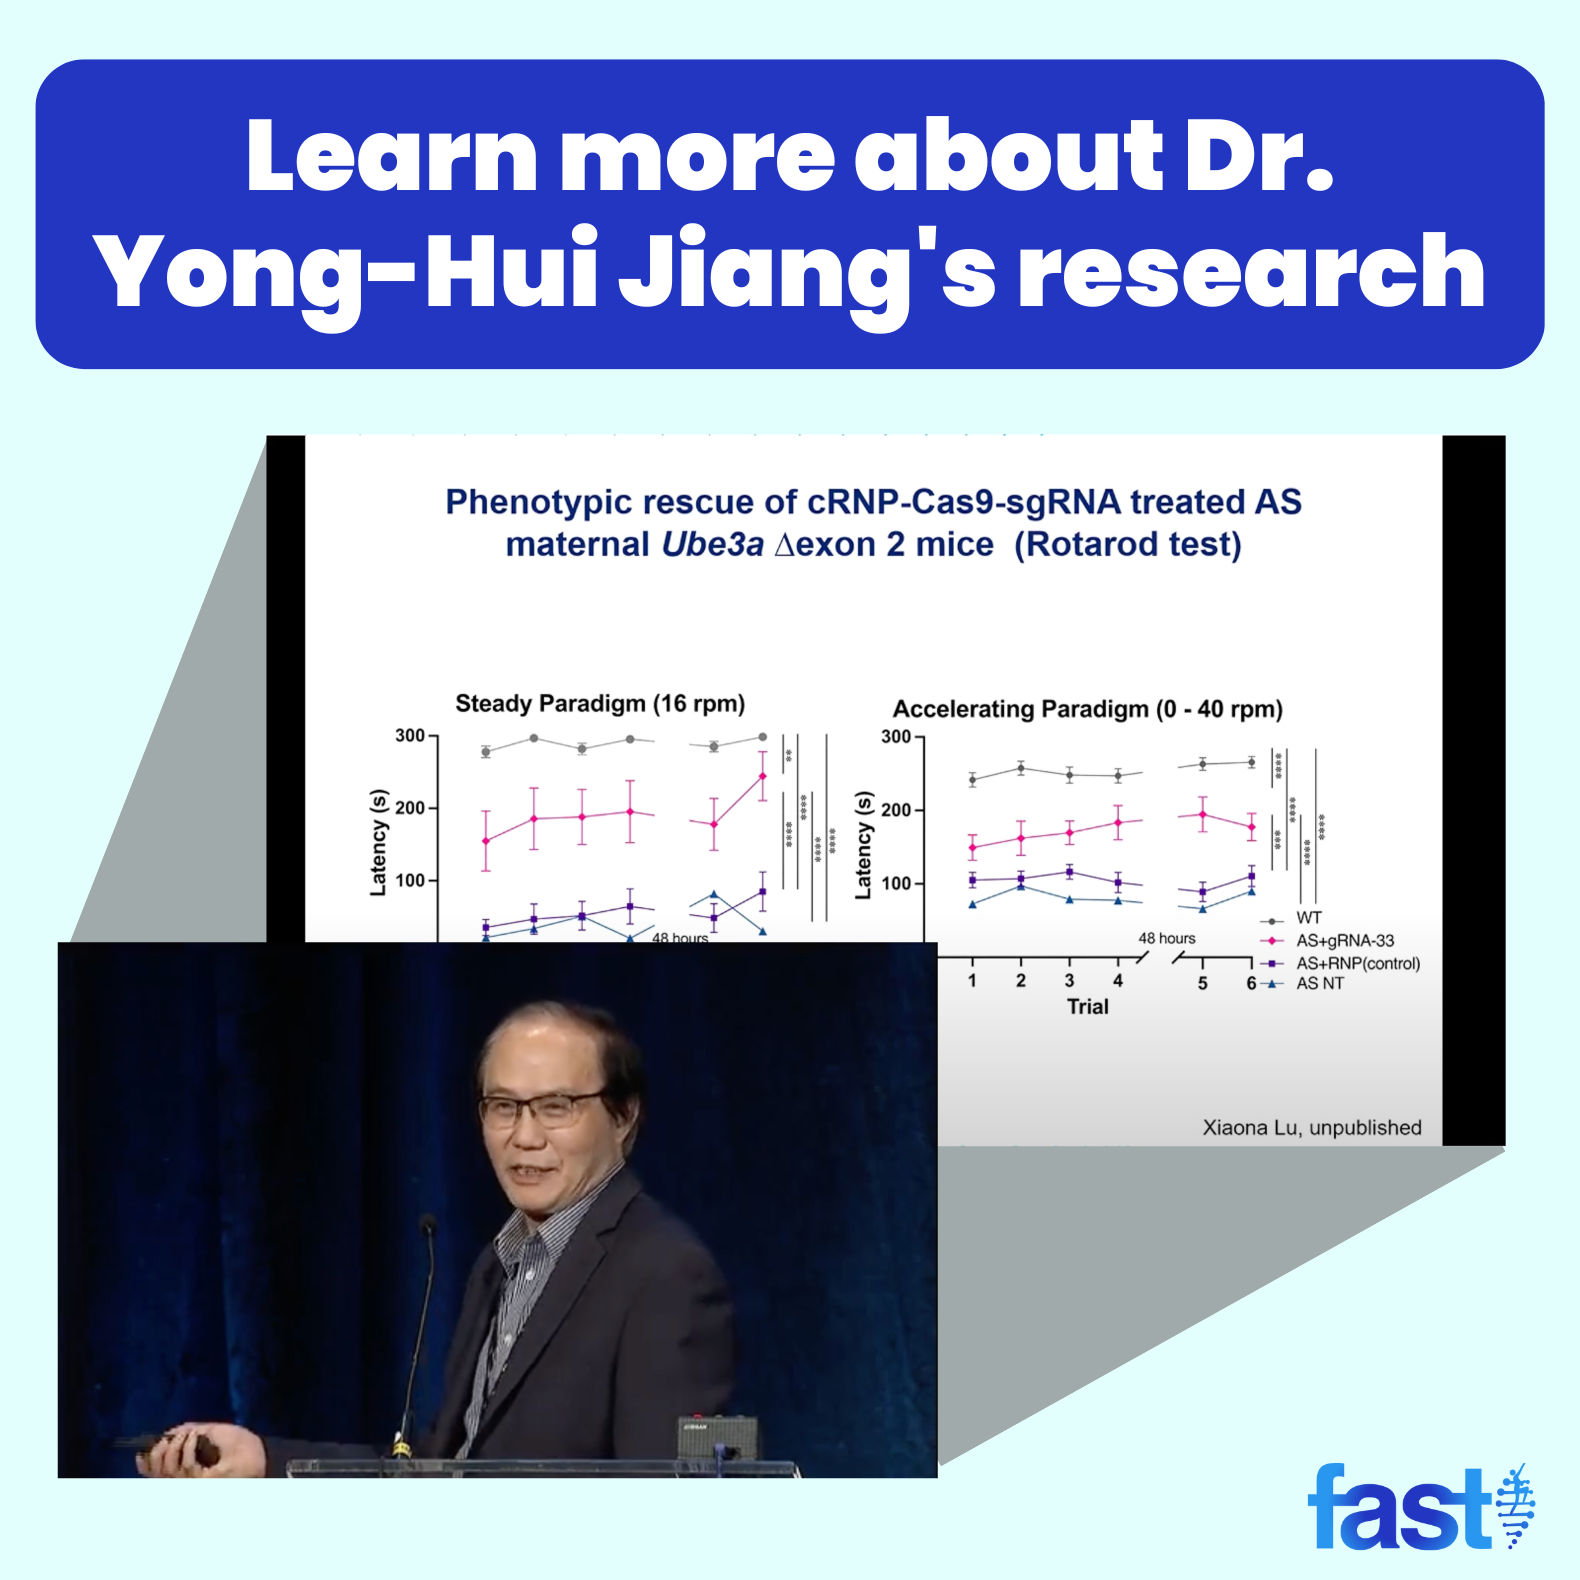 Learn more about Dr. Yong-Hui Jiang's research - with screenshots of him speaking and a slide from his presentation